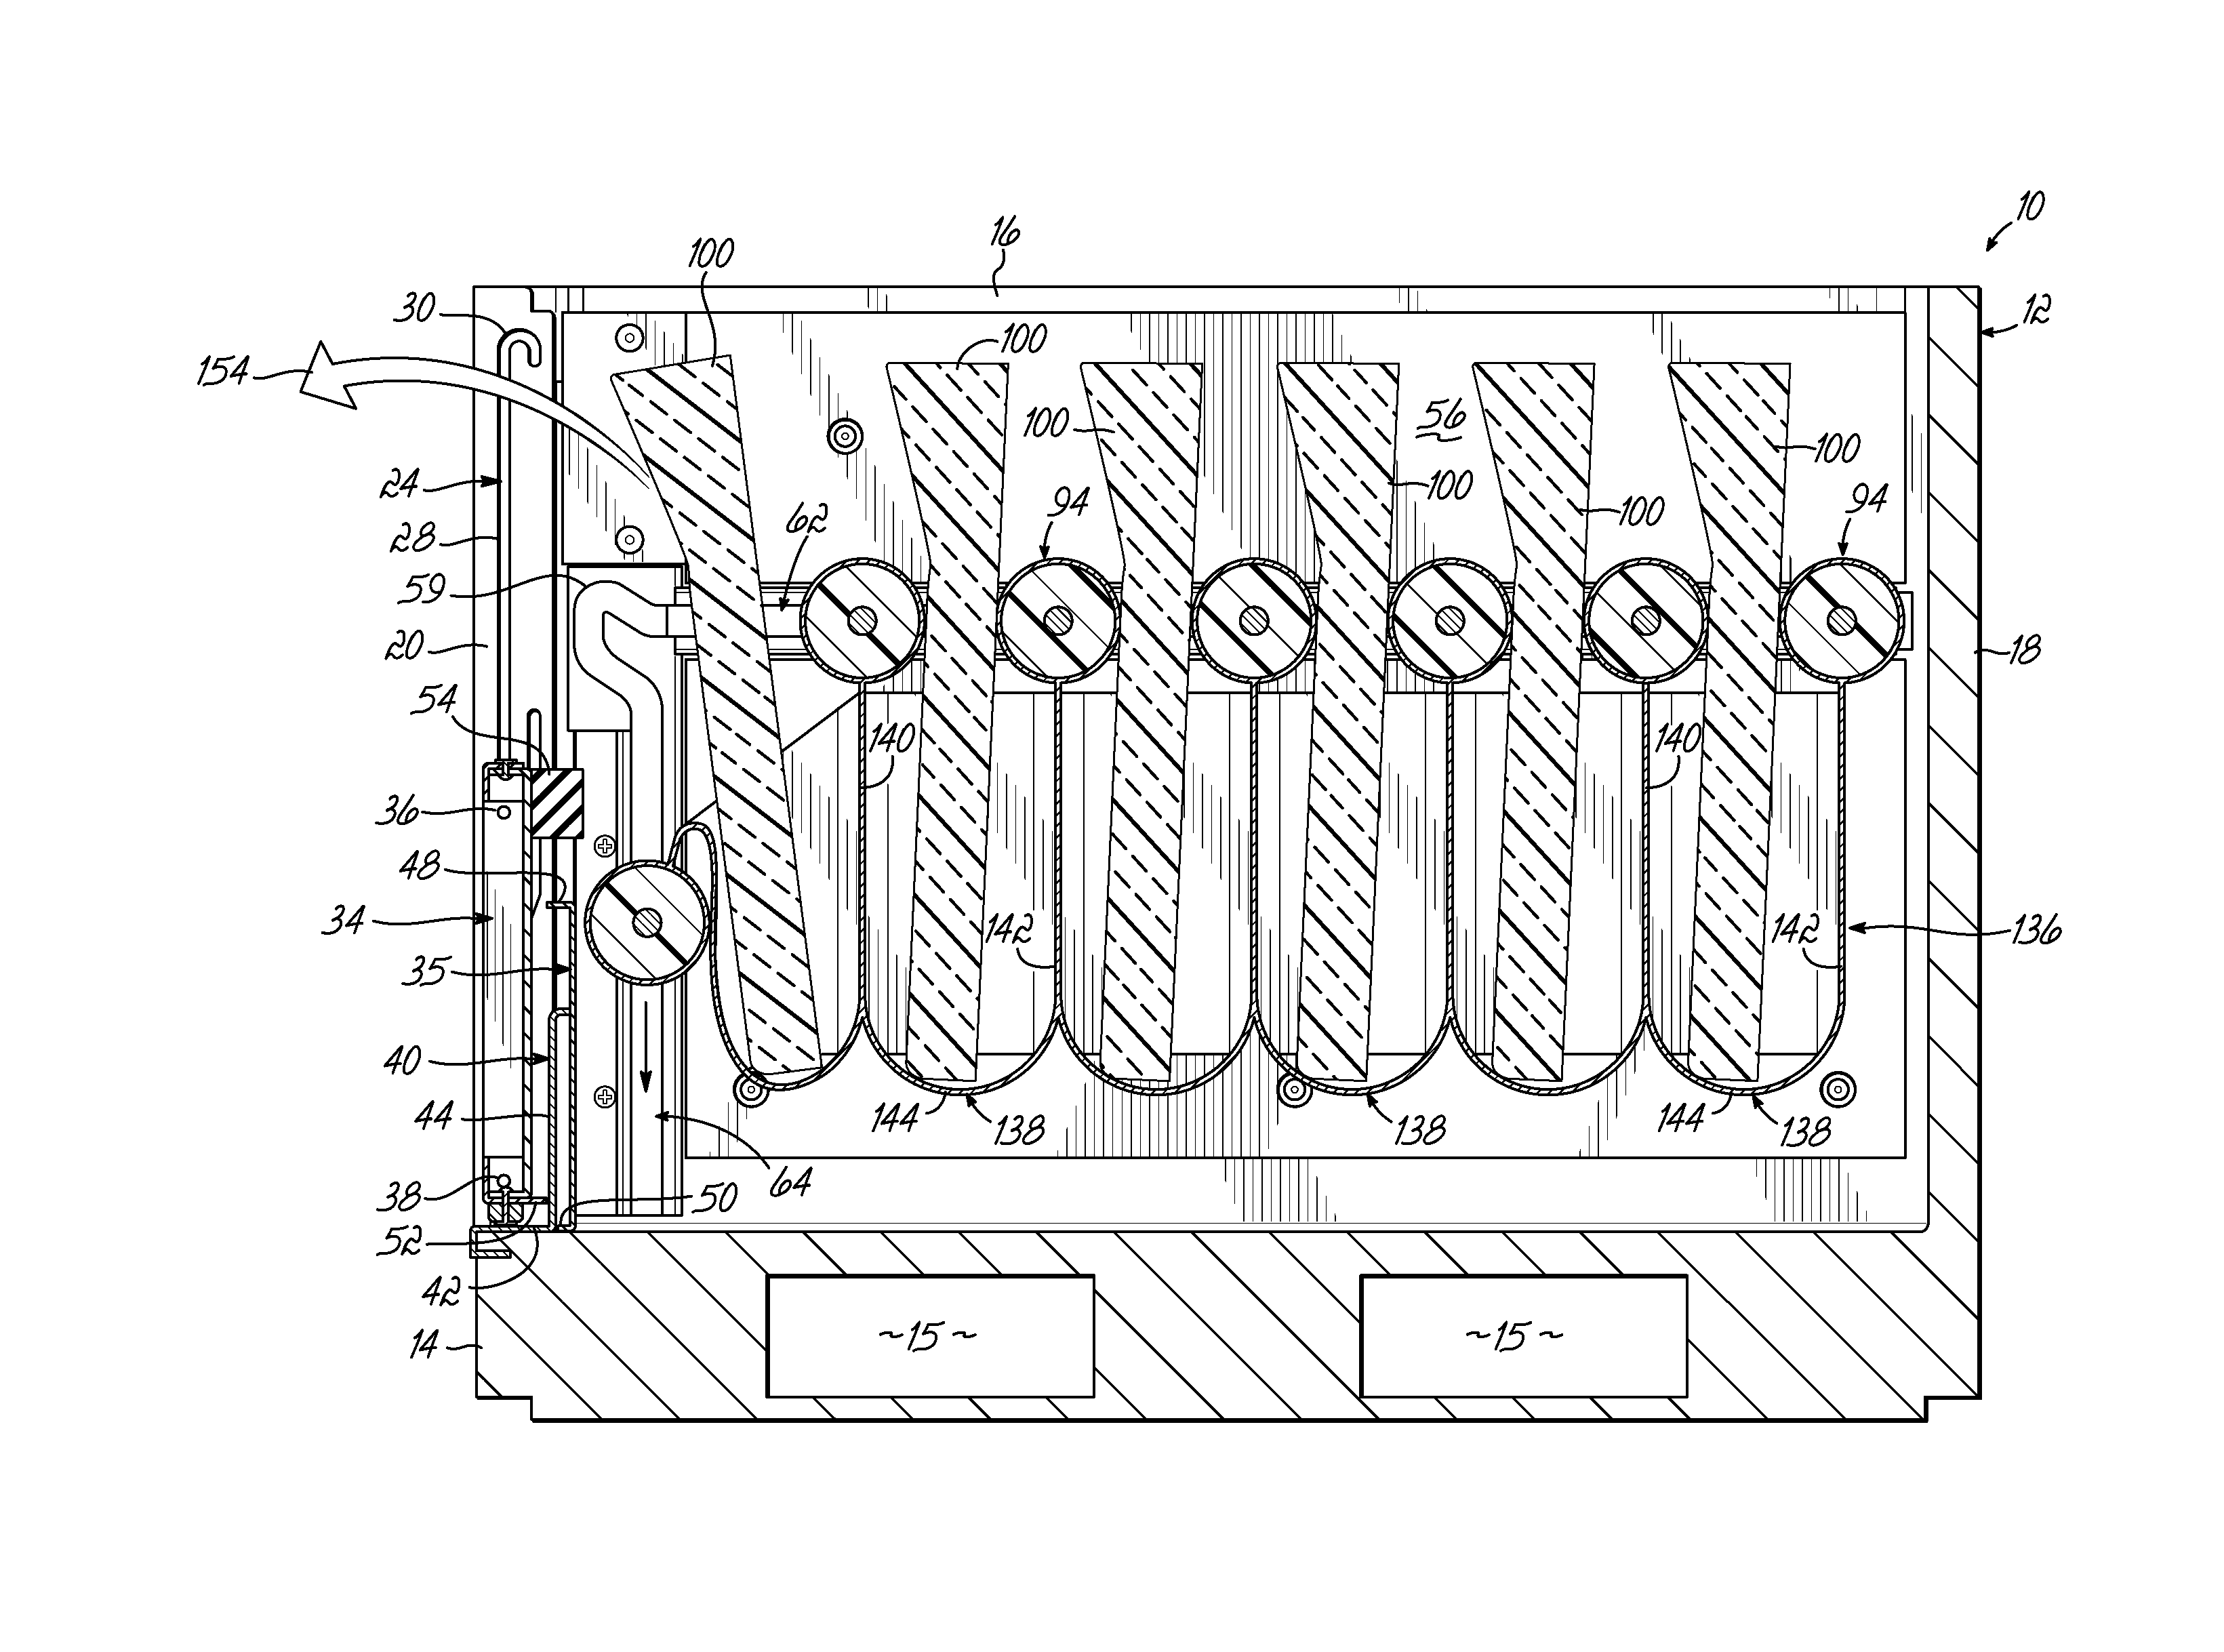 Container Having Padded Dunnage Supports and L-Shaped Tracks